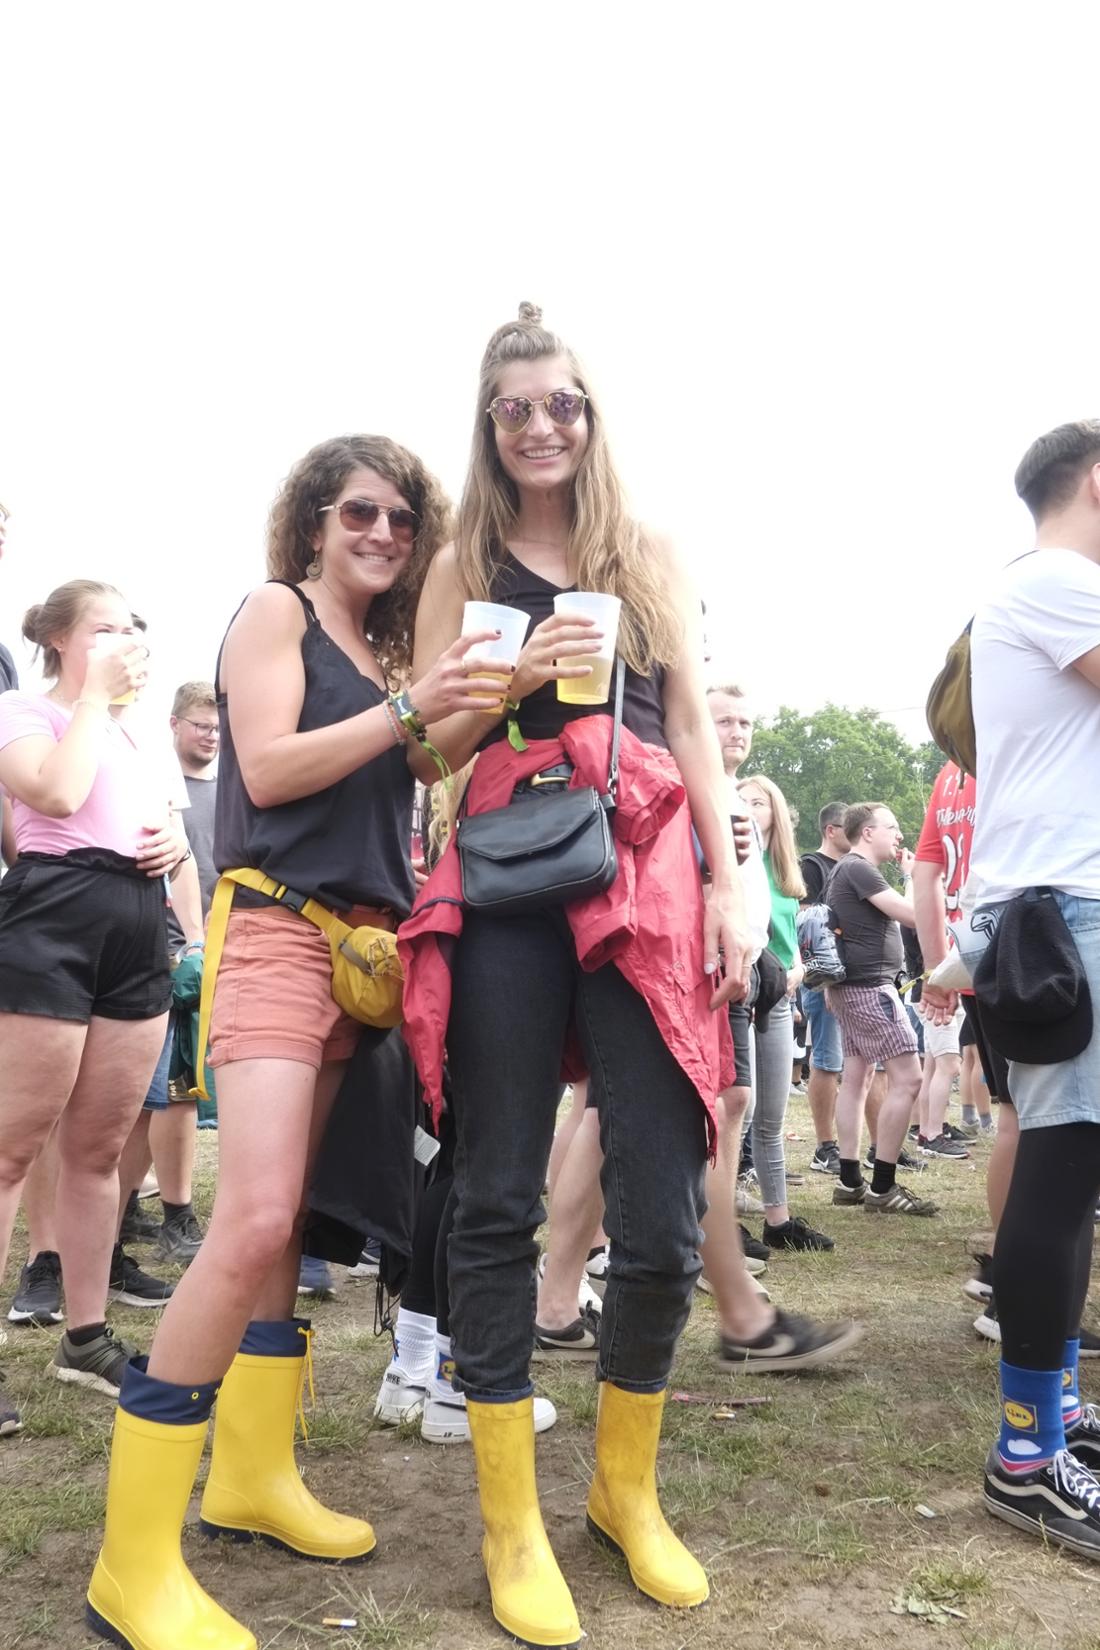 Yellow rubber boots as a fashion statement in the sun at the Rock im Park Festival 2022 in Nuremberg.